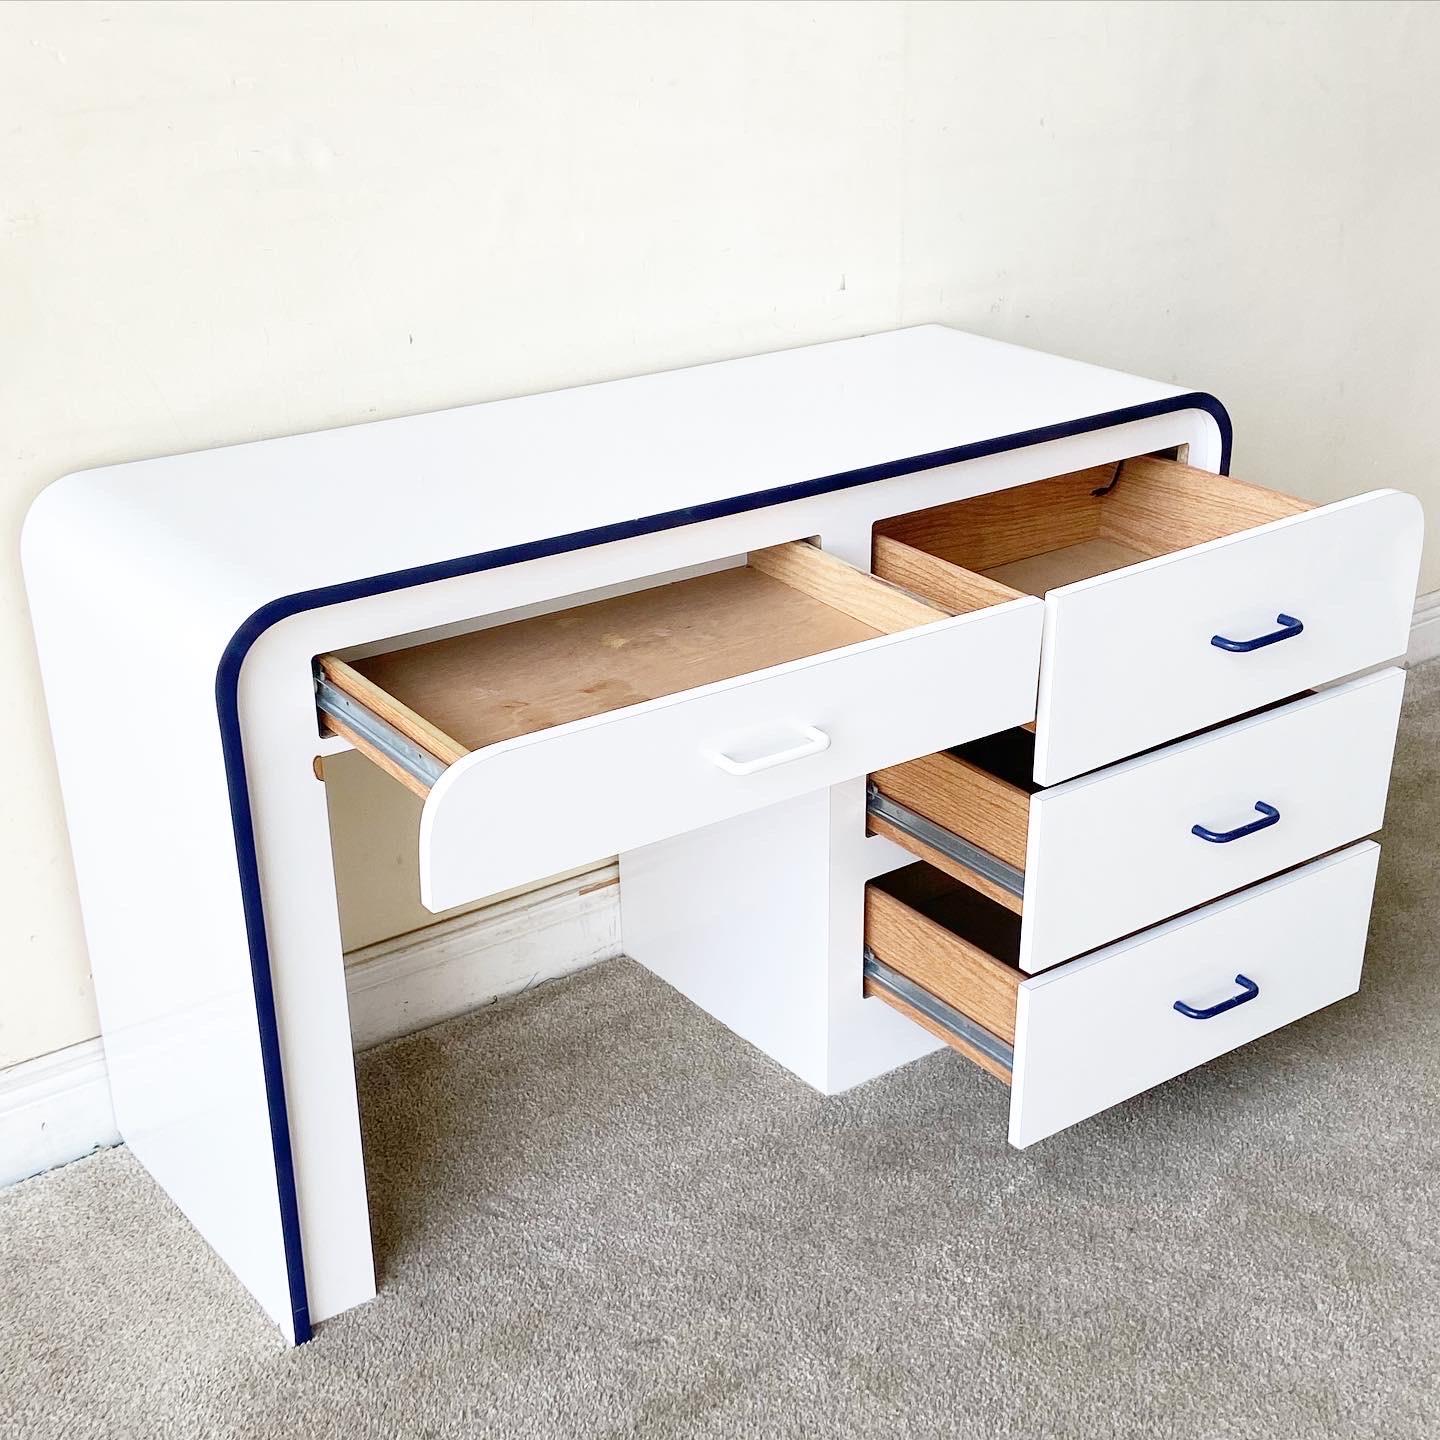 Post-Modern Postmodern White Lacquer Laminate Desk With Navy Trim and Handles